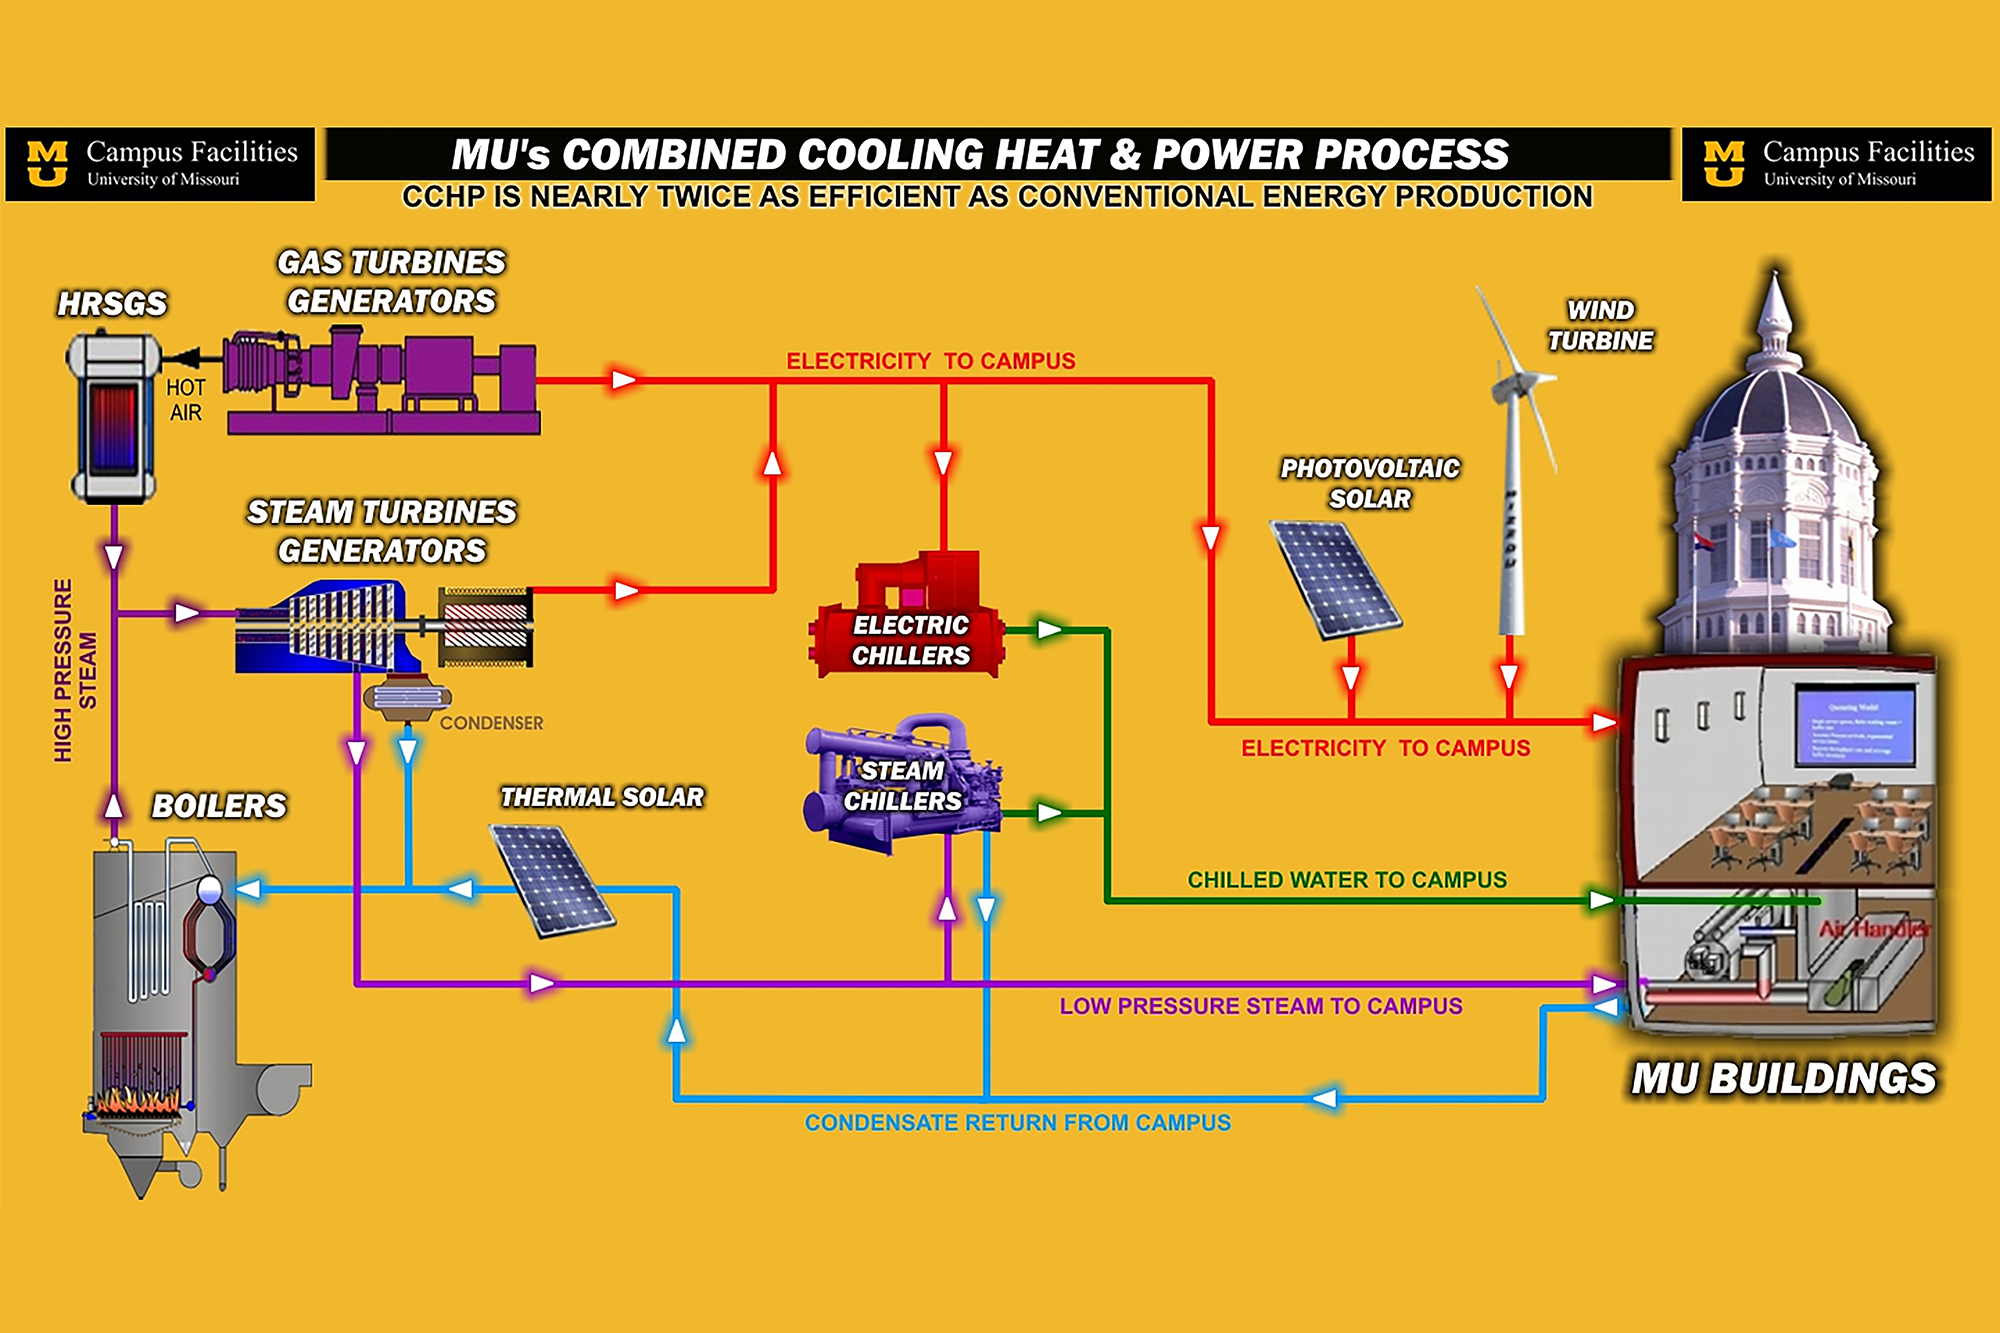 MU’s combined cooling heat and power process